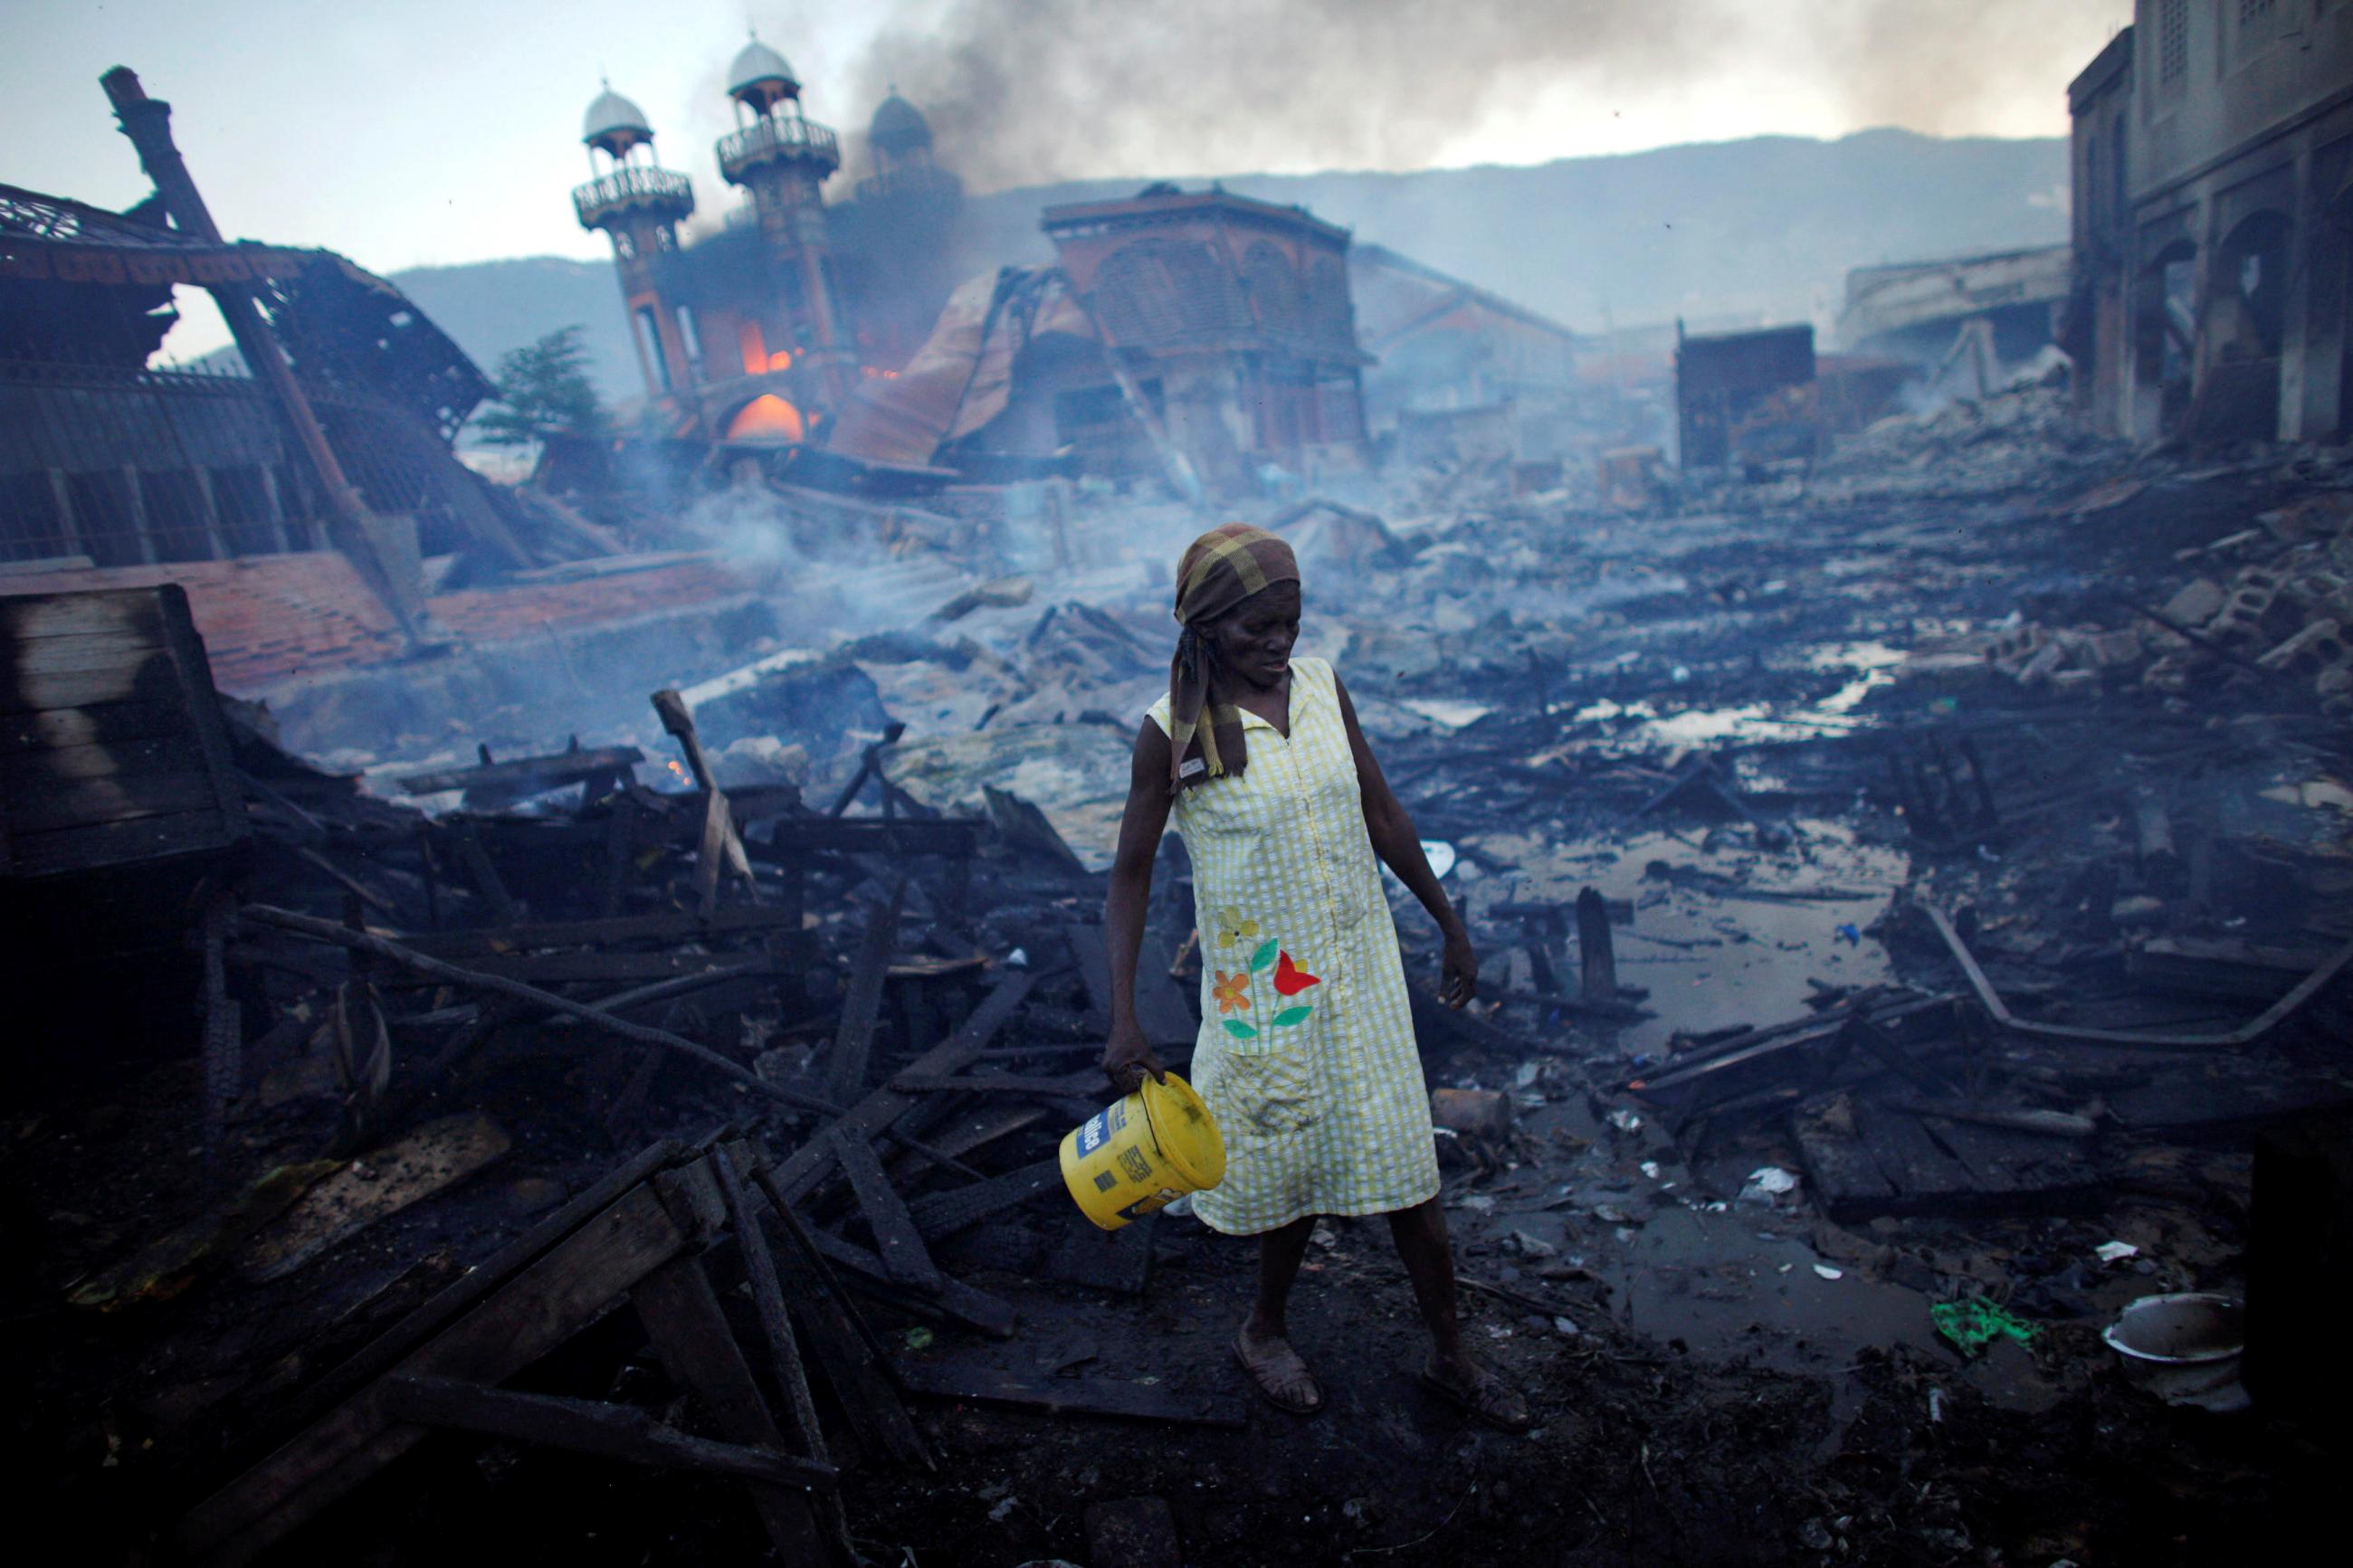 A woman walks near a fire at the Hyppolite iron market in Port-au-Prince, Haiti, January 29, 2010. Picture taken January 29, 2010.